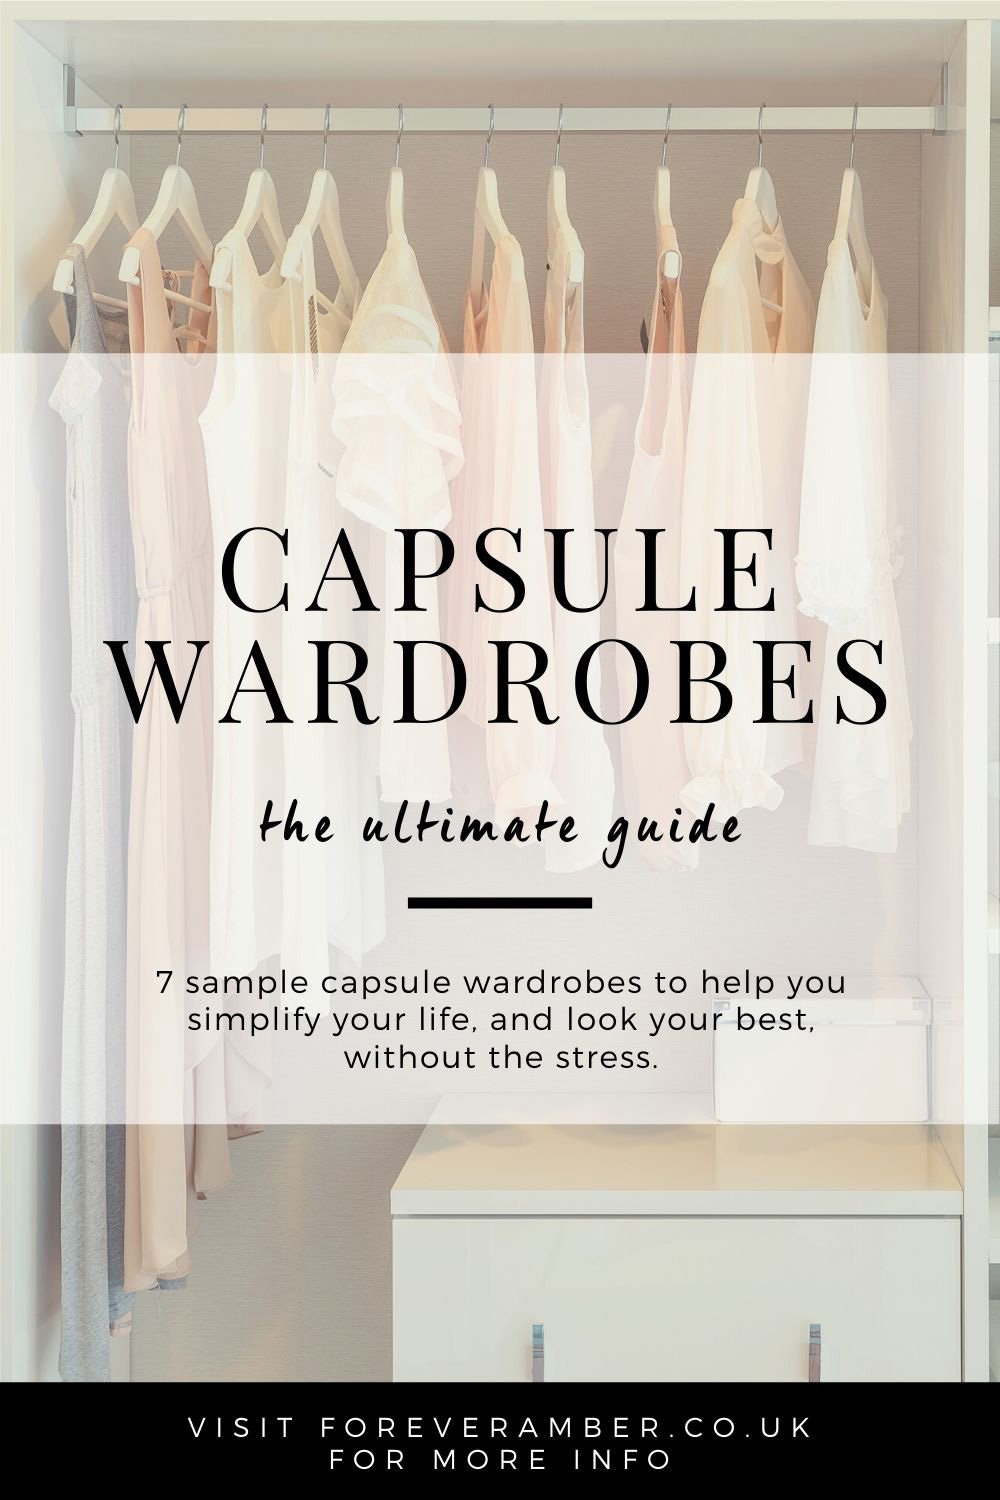 The Ultimate Guide to Capsule Wardrobes